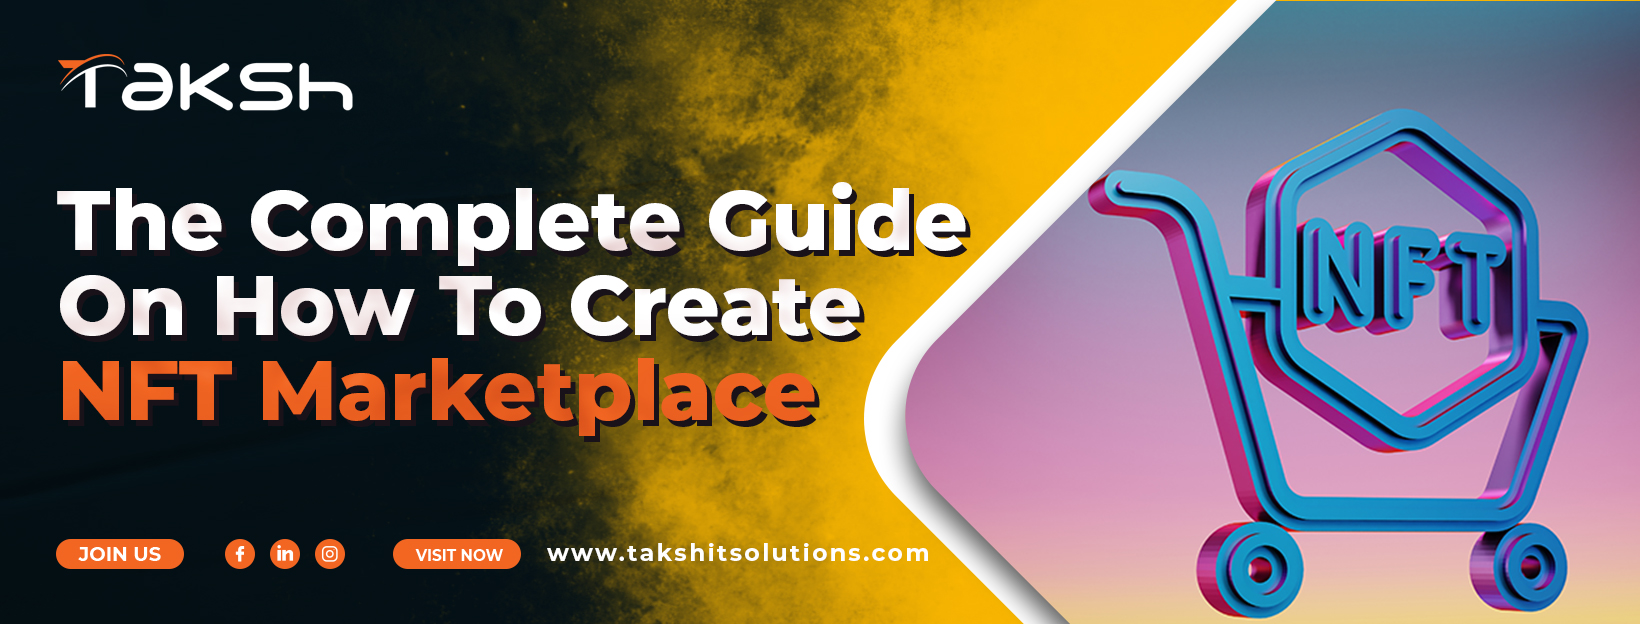 The Complete Guide On How To Create NFT Marketplace || Taksh IT Solutions Private Limited